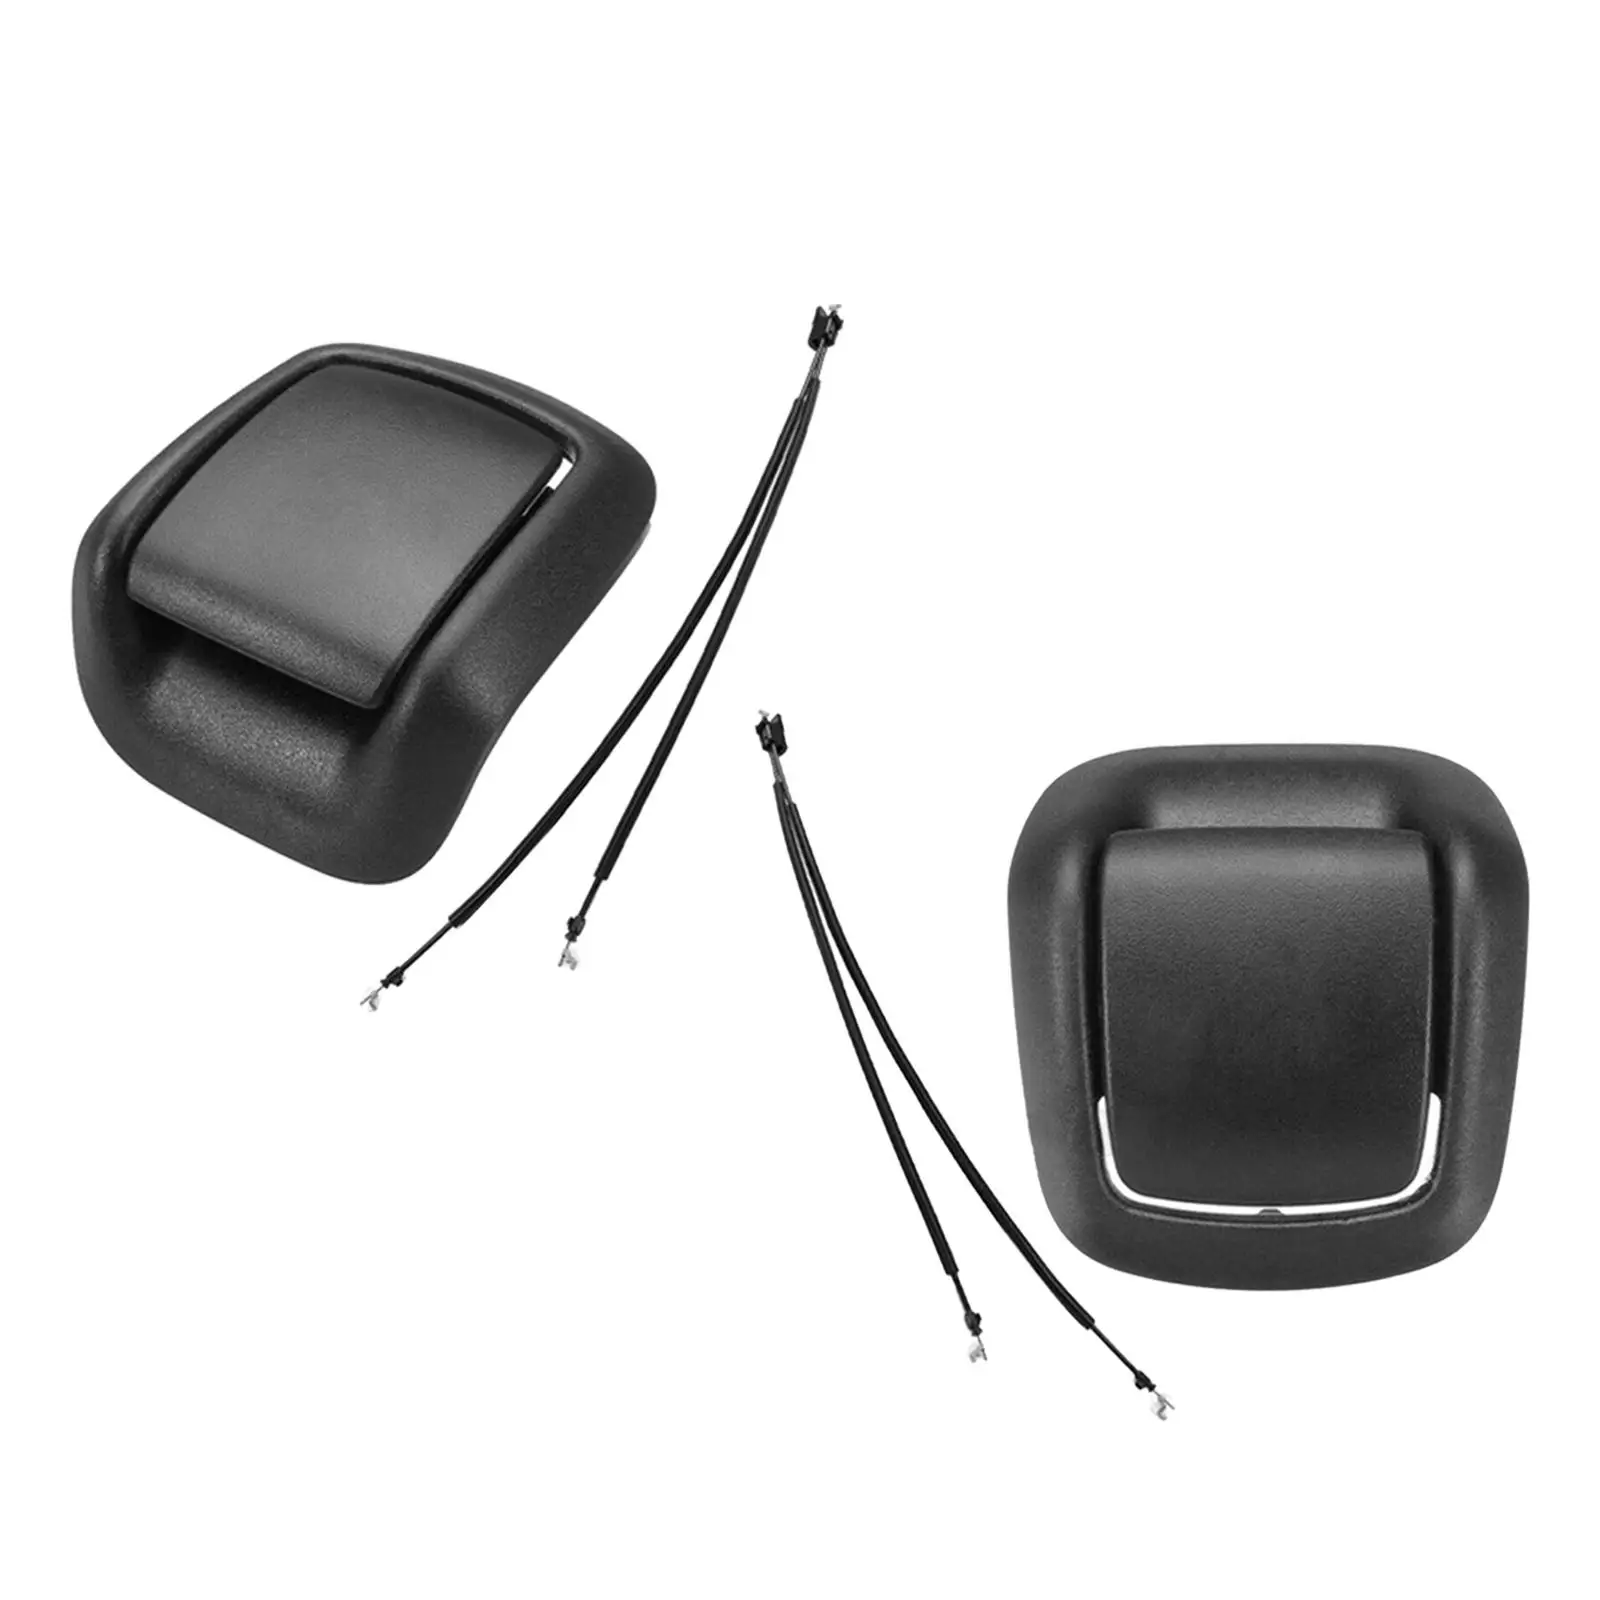 Sturdy Seat Tilt handle Cable Seat Adjustment Handle Cap Replaces Easy Installation for Fiesta MK6 3 Door Assembly